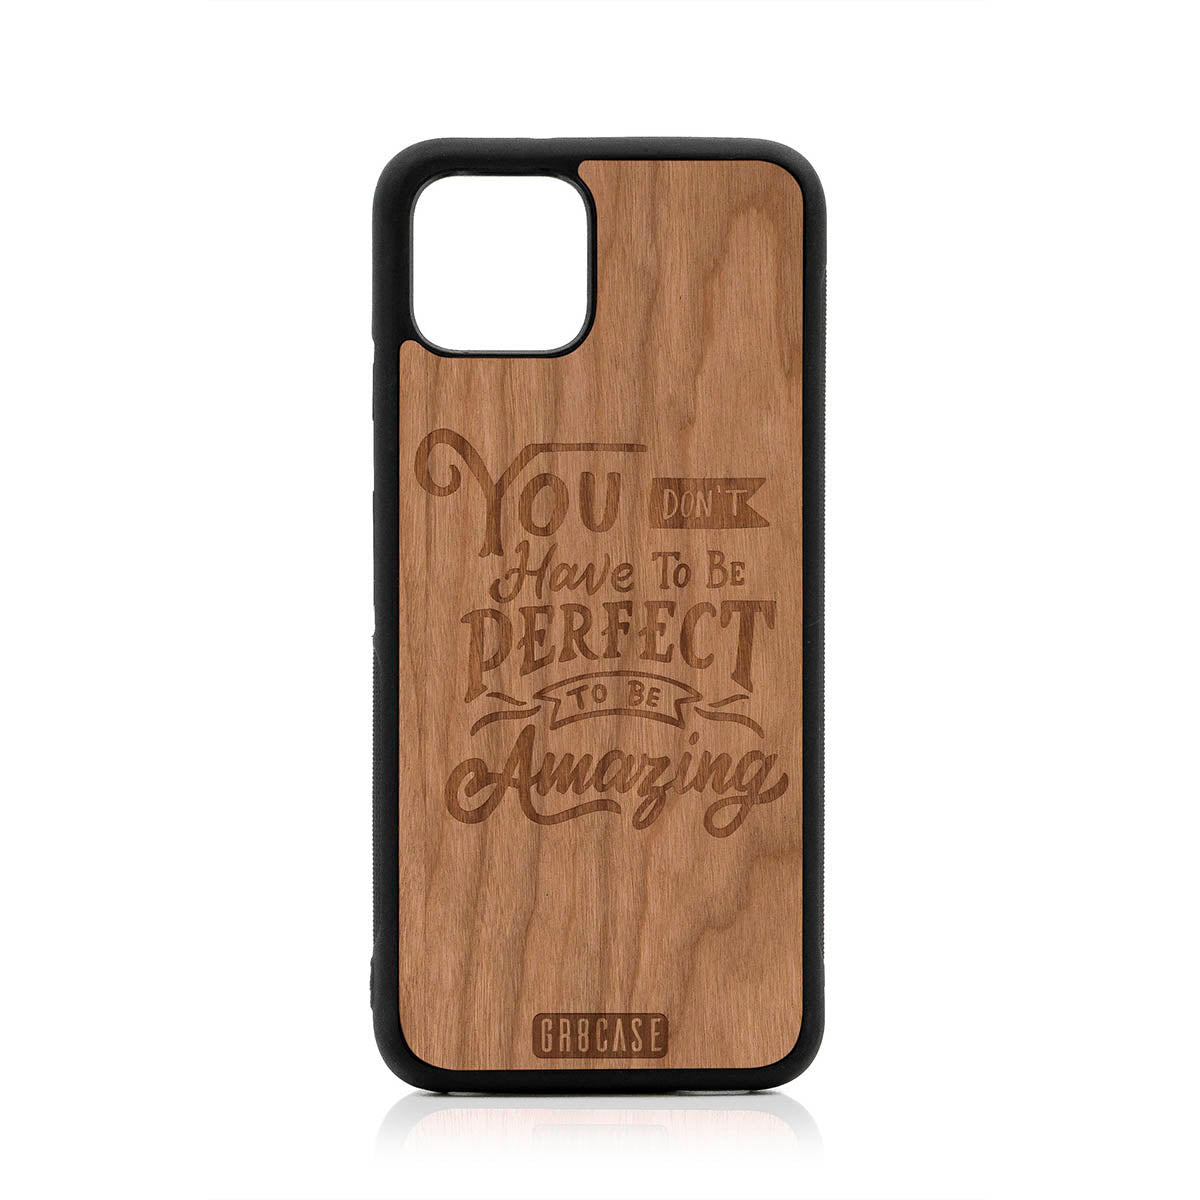 You Don't Have To Be Perfect To Be Amazing Design Wood Case For Google Pixel 4